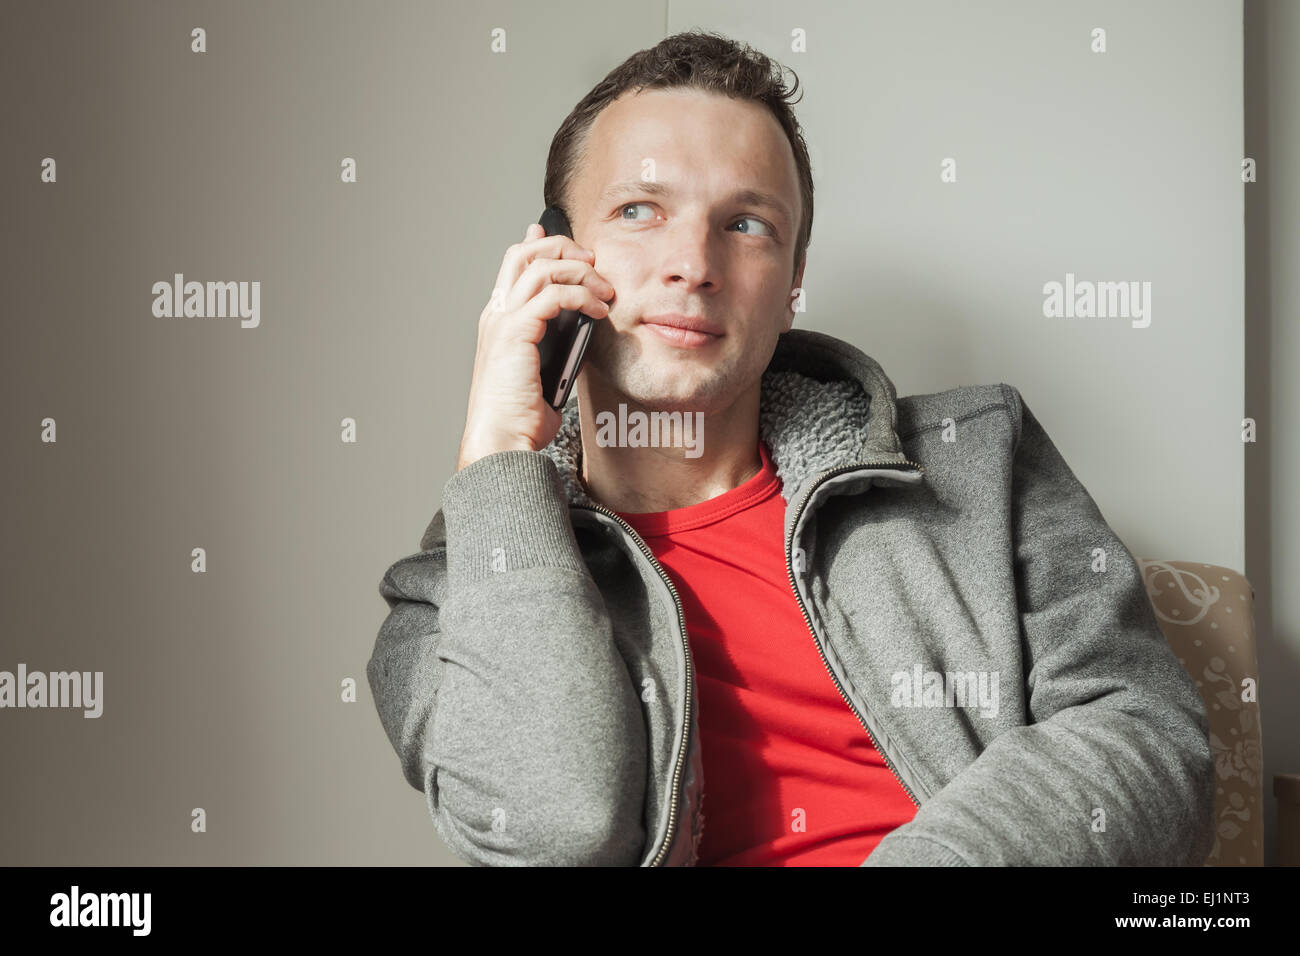 Portrait of young adult Caucasian man talking on mobile phone Stock Photo